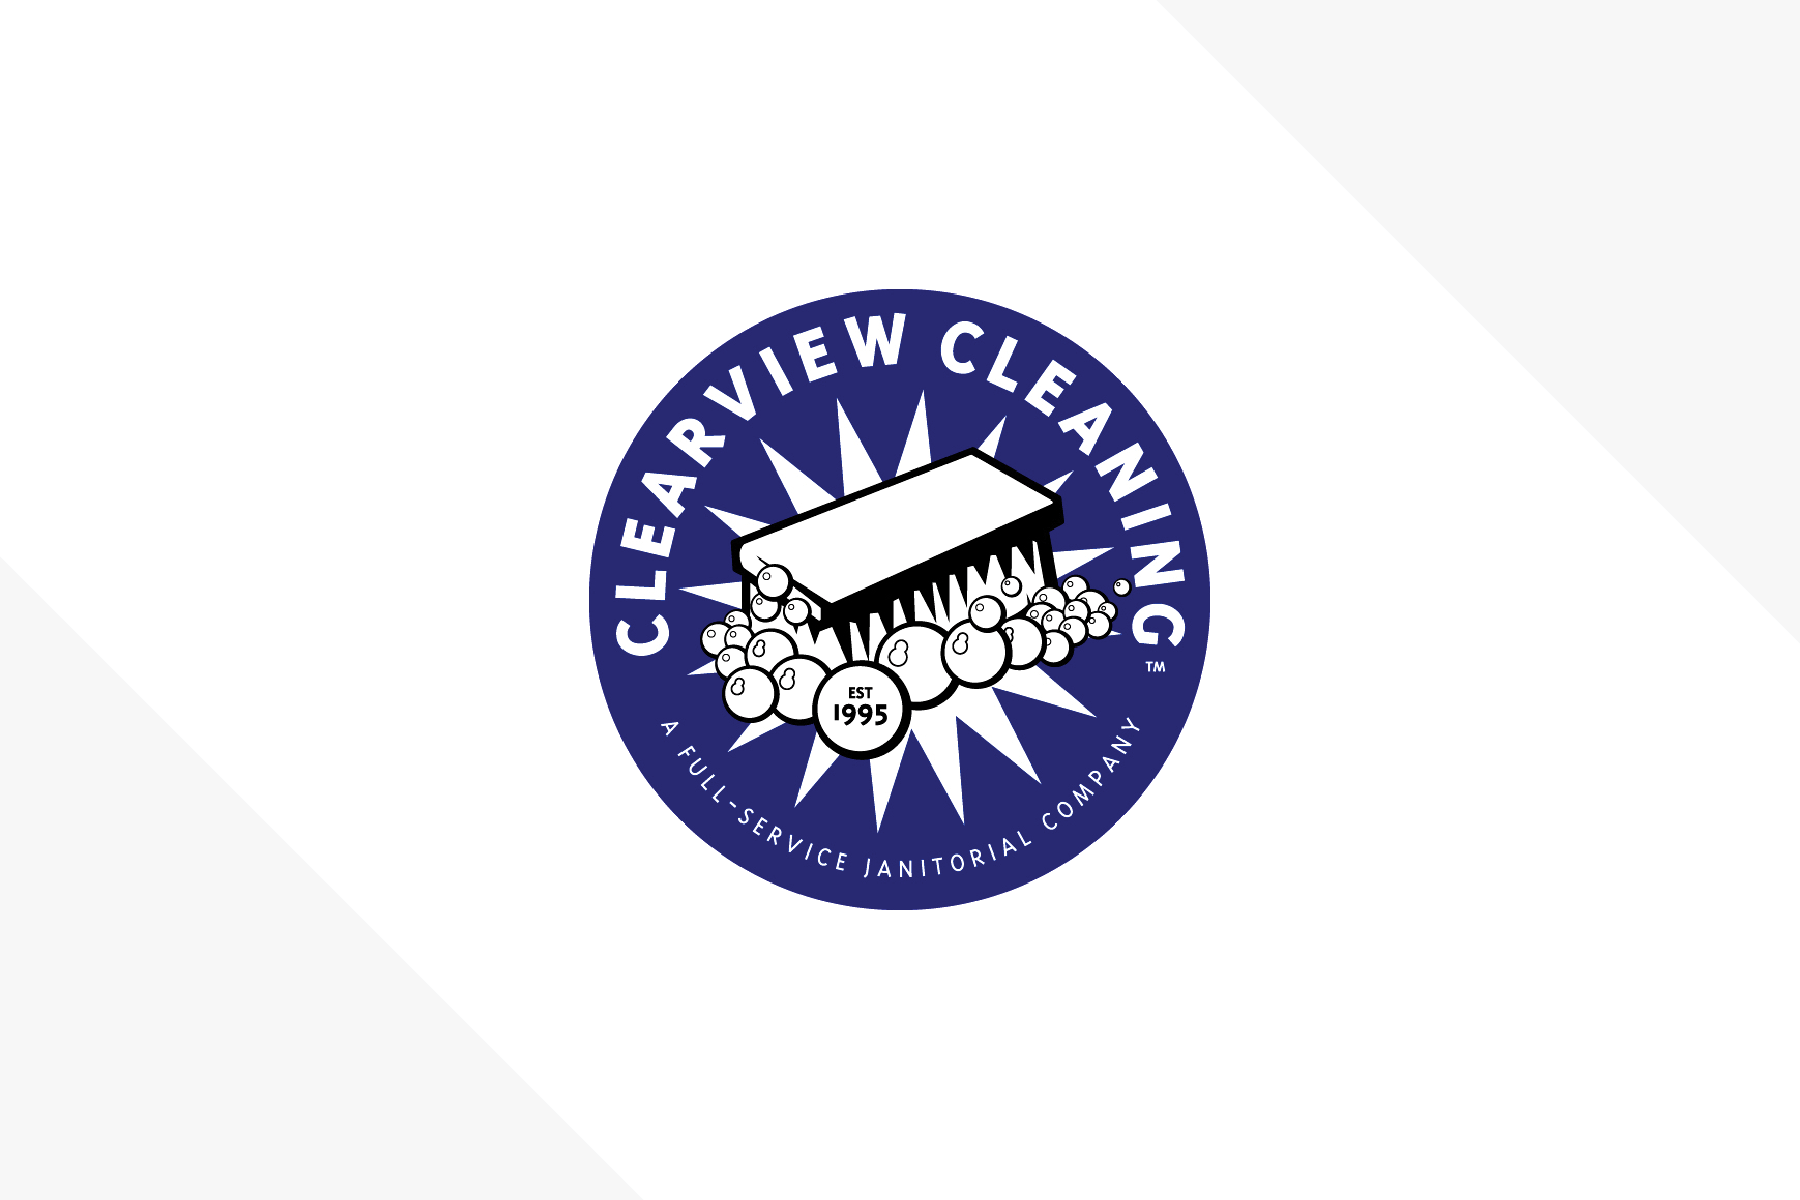 clearview cleaning rich m atonis